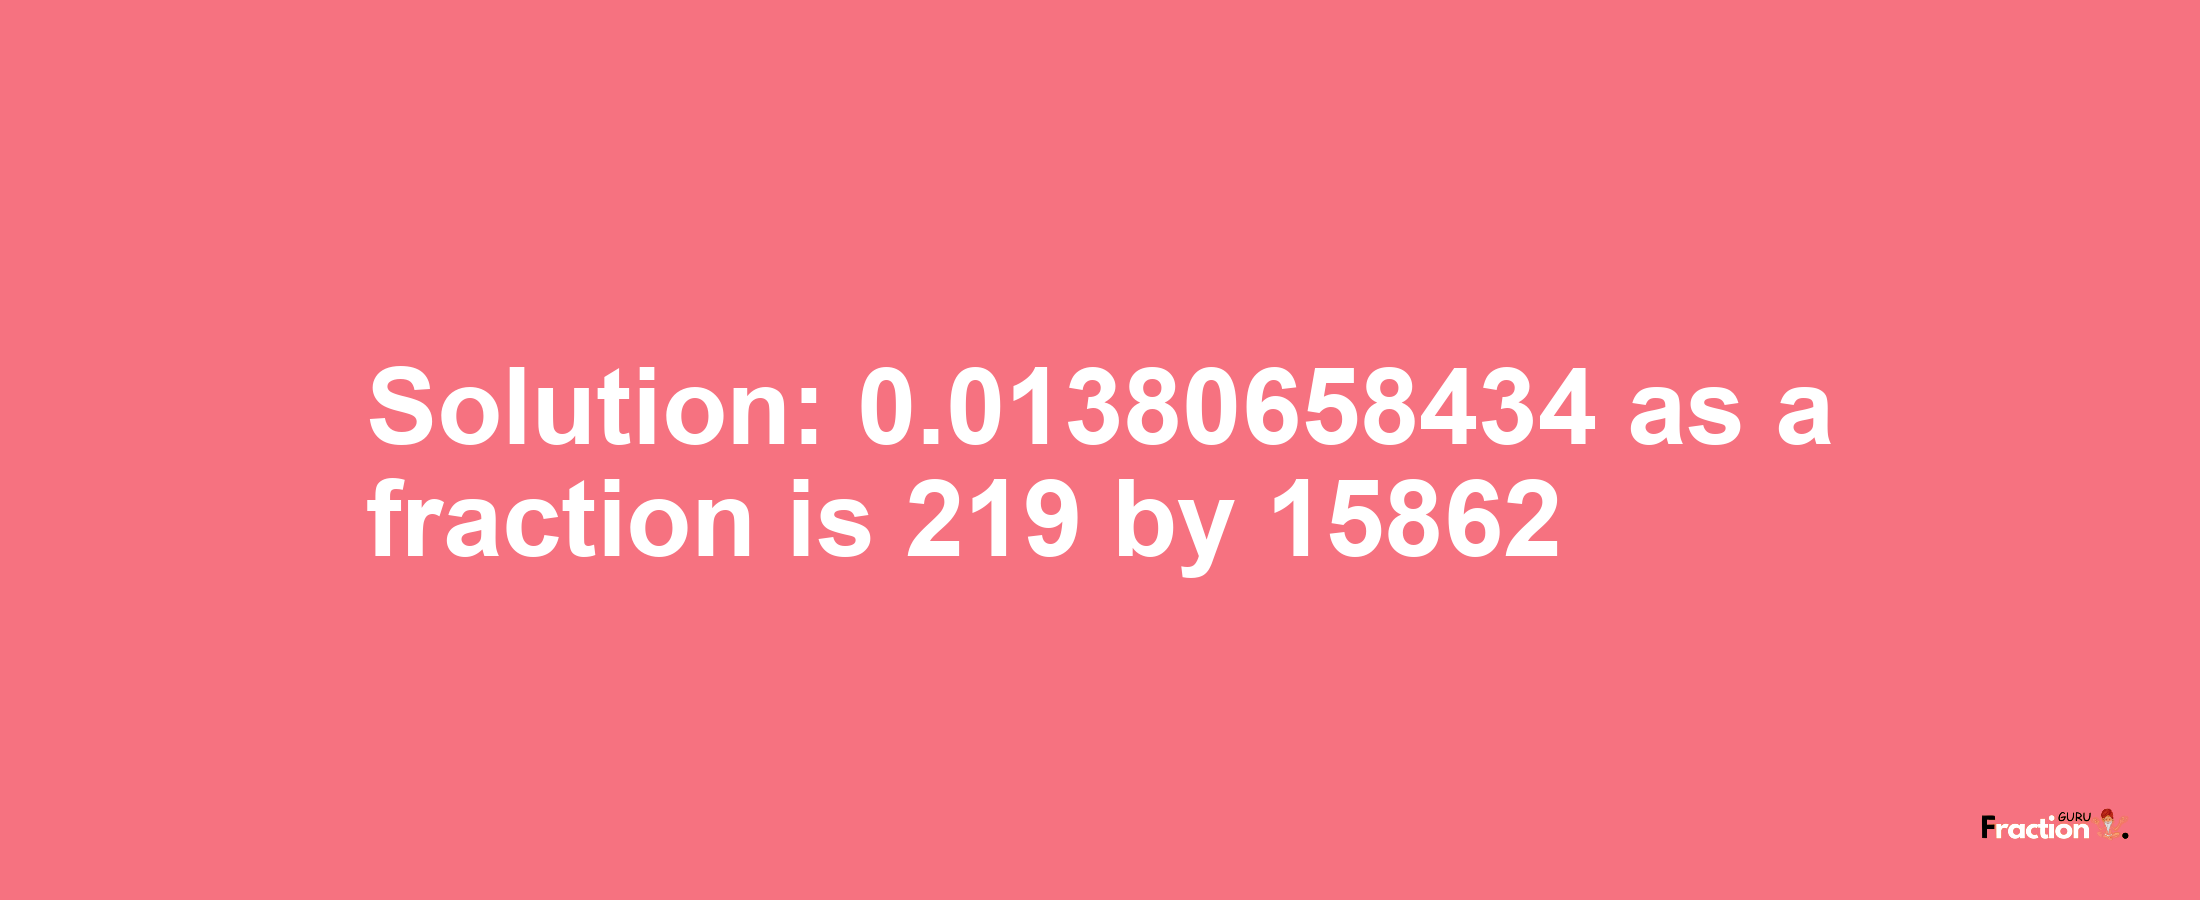 Solution:0.01380658434 as a fraction is 219/15862